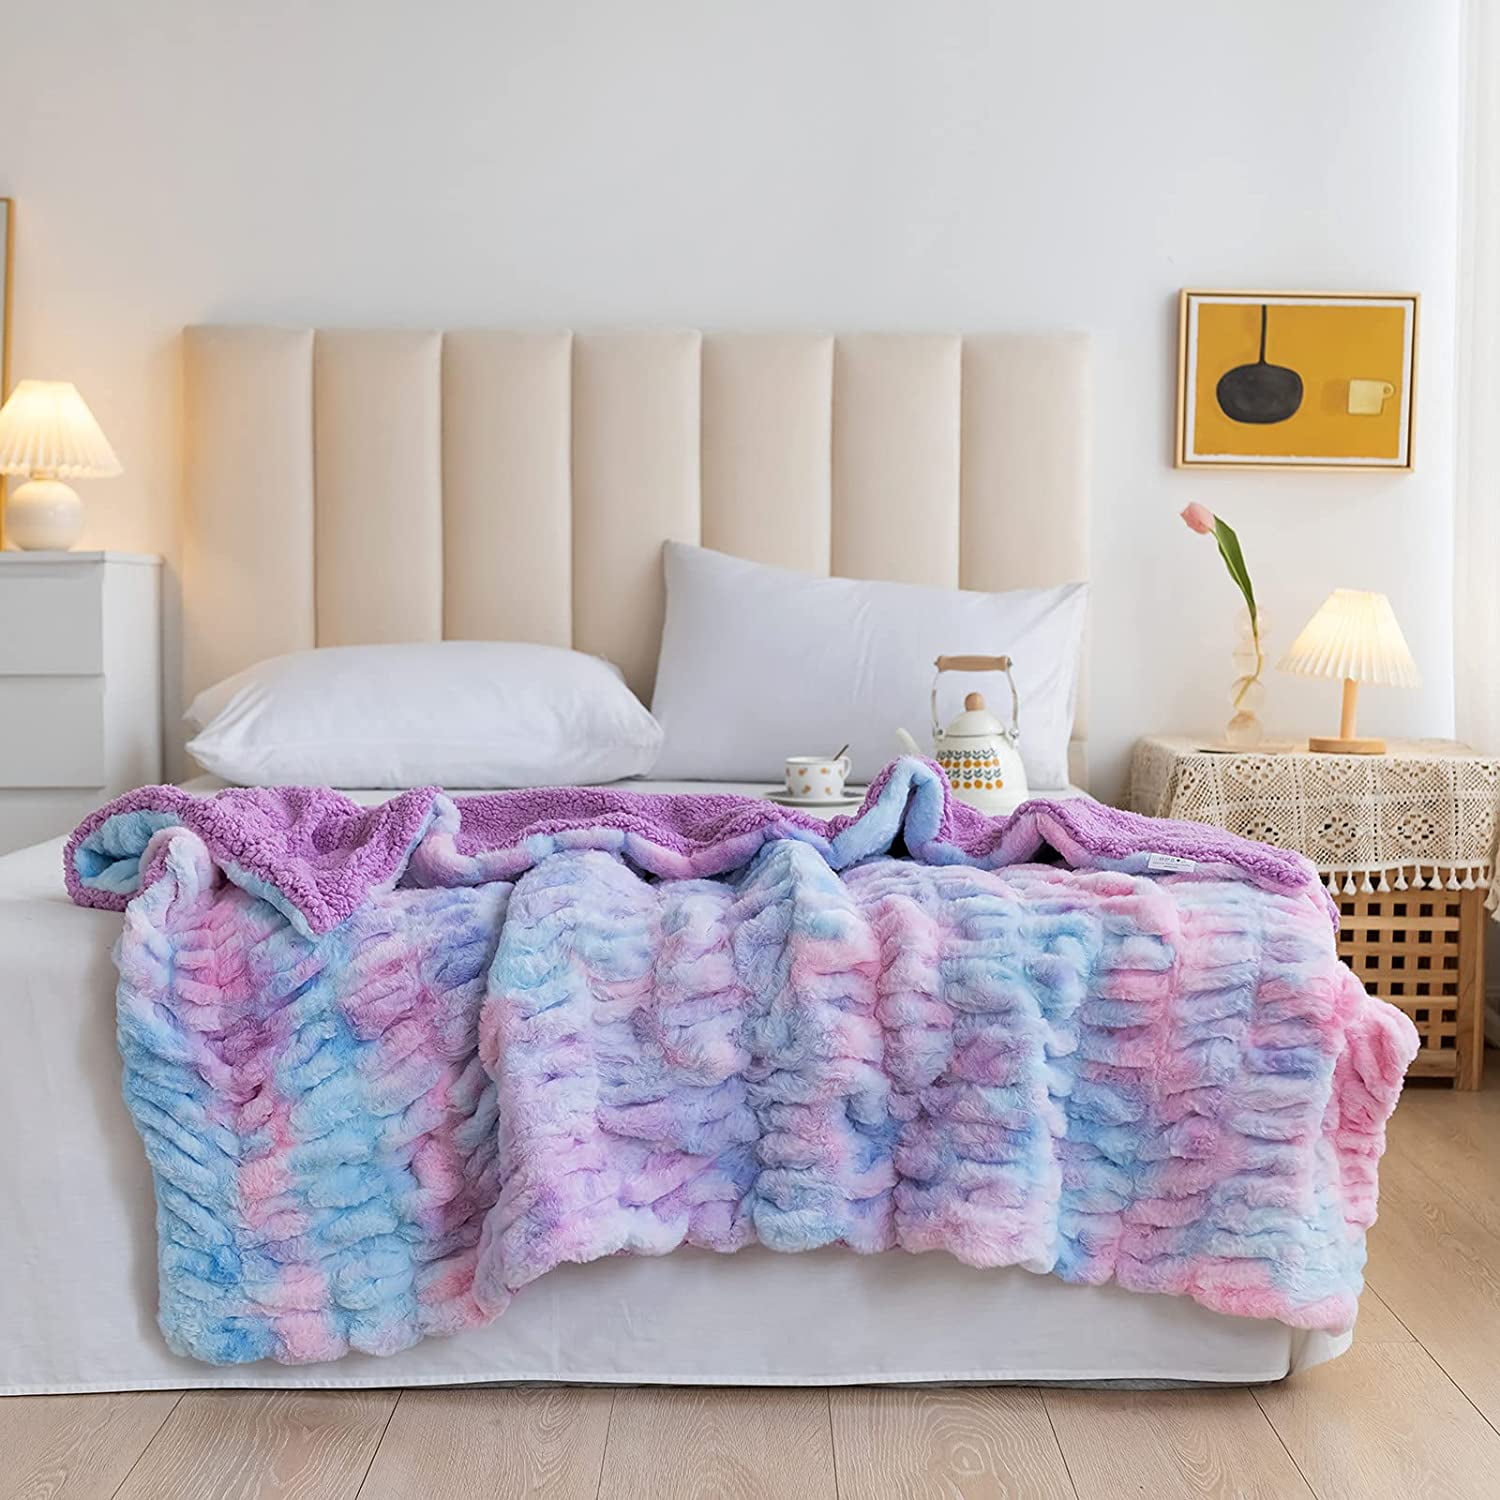 Purple Rainbow, Throw 40x50 NEWCOSPLAY Super Soft Faux Fur Throw Blanket Premium Sherpa Backing Warm and Cozy Throw Decorative for Bedroom Sofa Floor